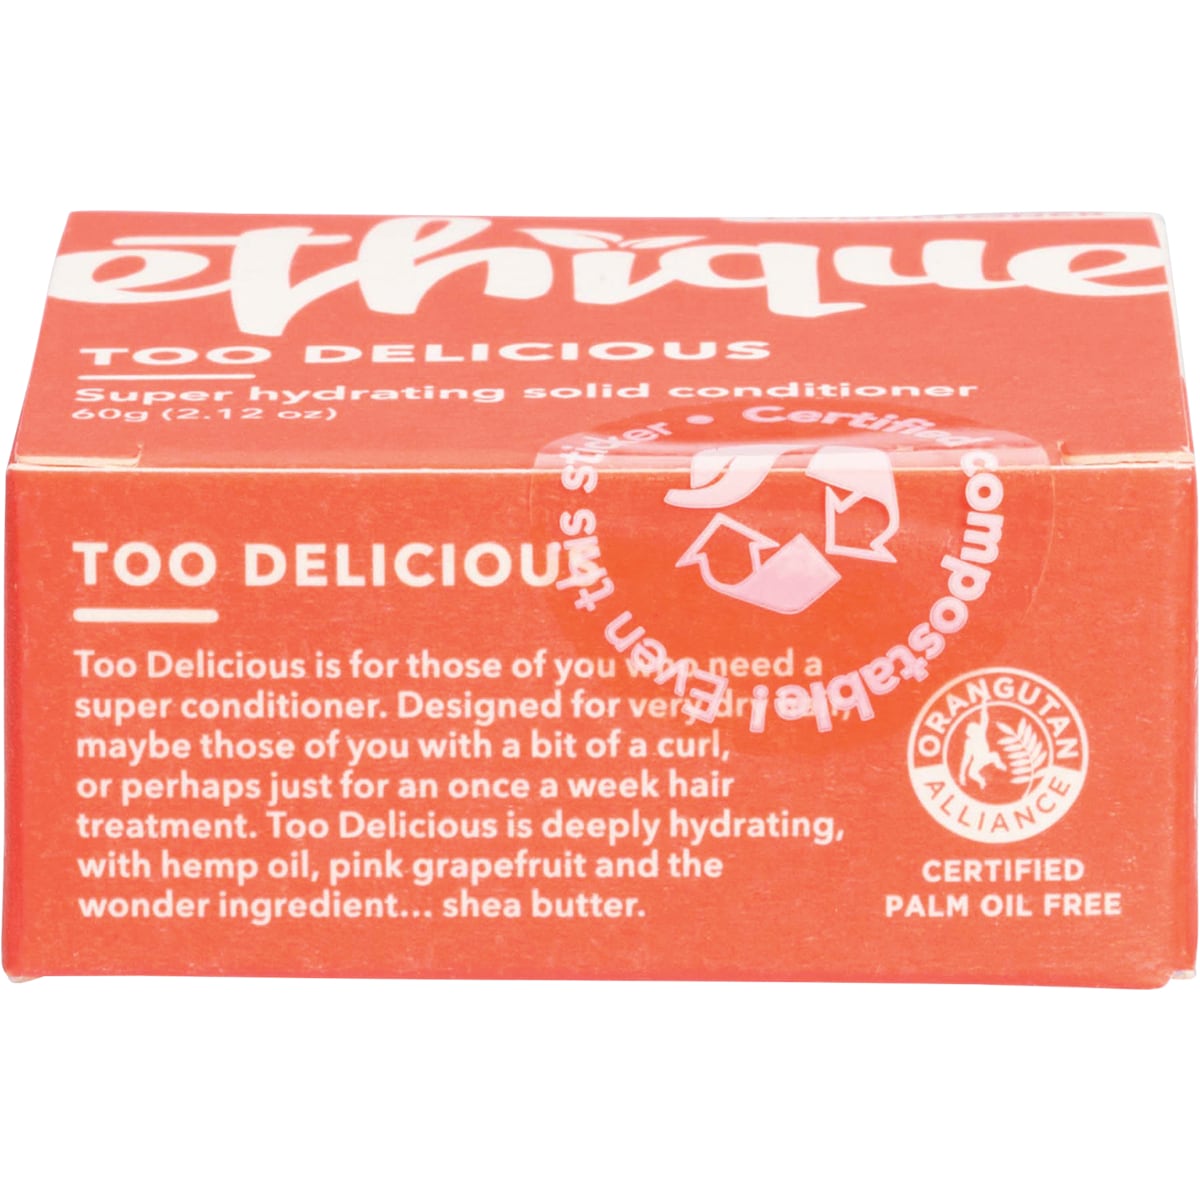 Ethique Solid Conditioner Bar Too Delicious Super Hydrating 60G